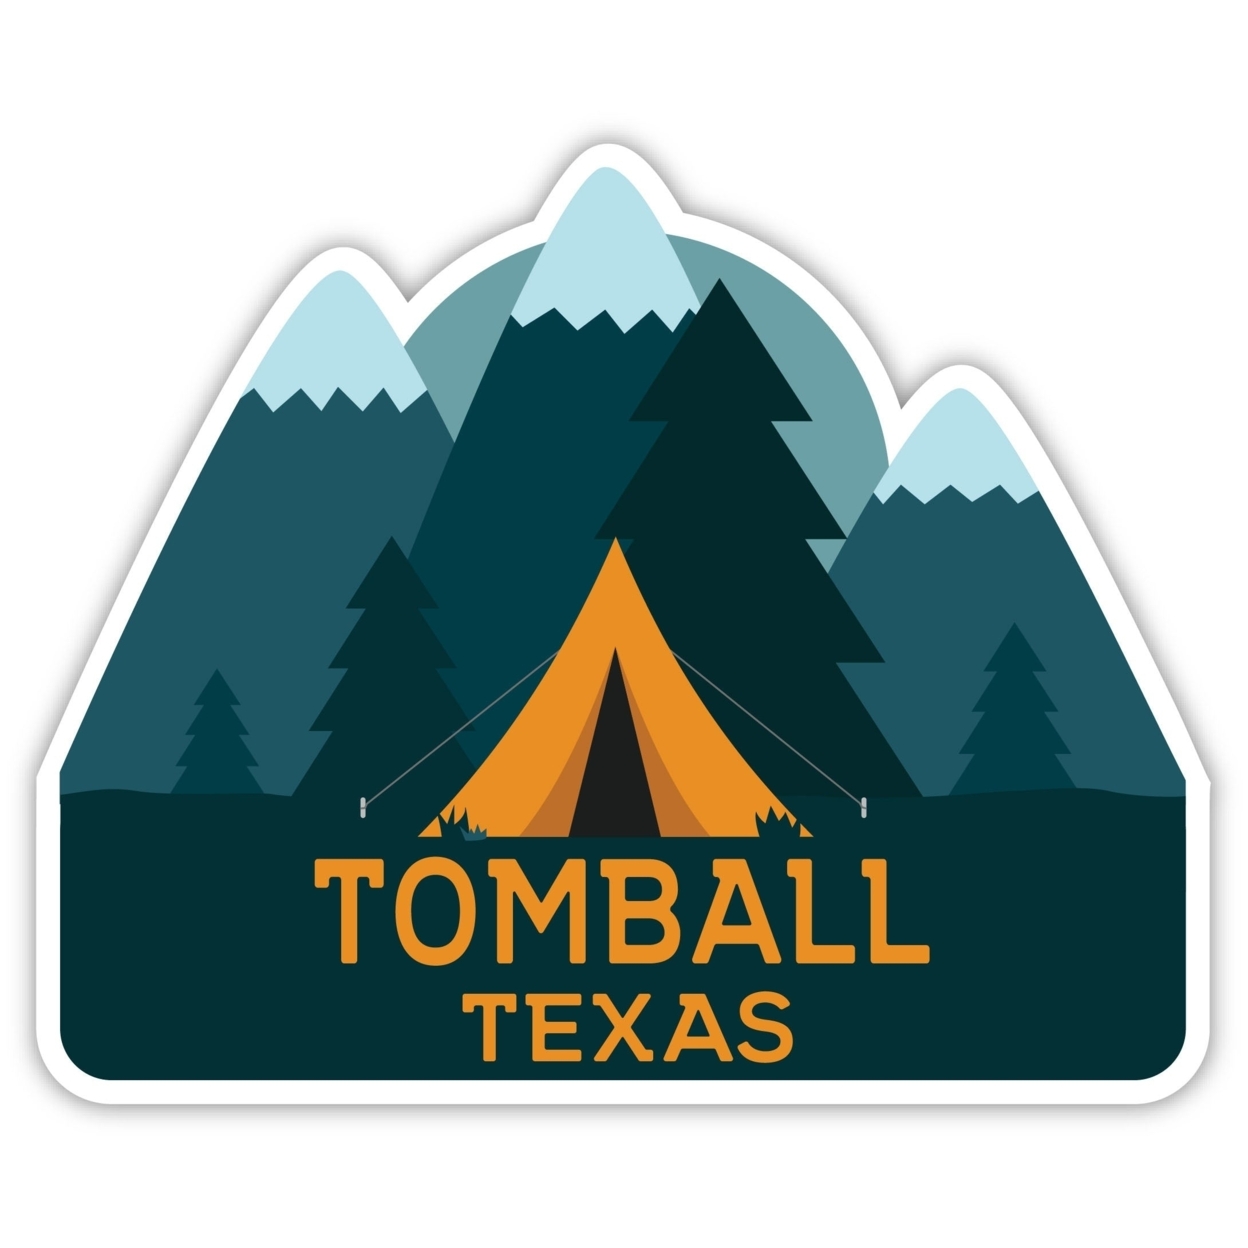 Tomball Texas Souvenir Decorative Stickers (Choose Theme And Size) - Single Unit, 2-Inch, Tent